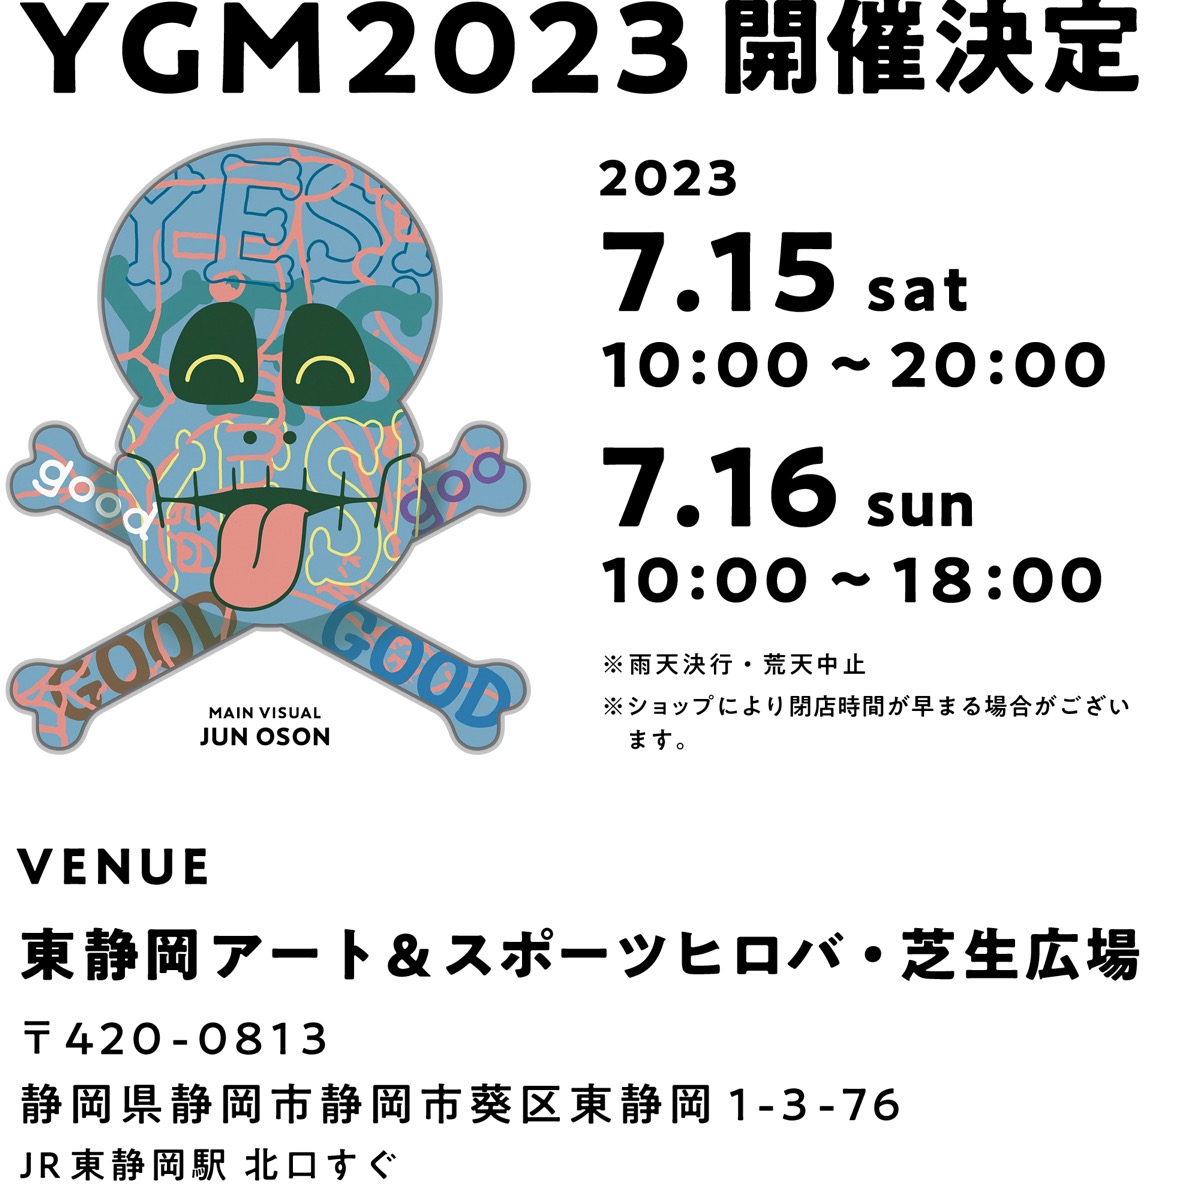 SEE SEE × New Era 新作コラボキャップが国内7月15日／7月16日にYGM 